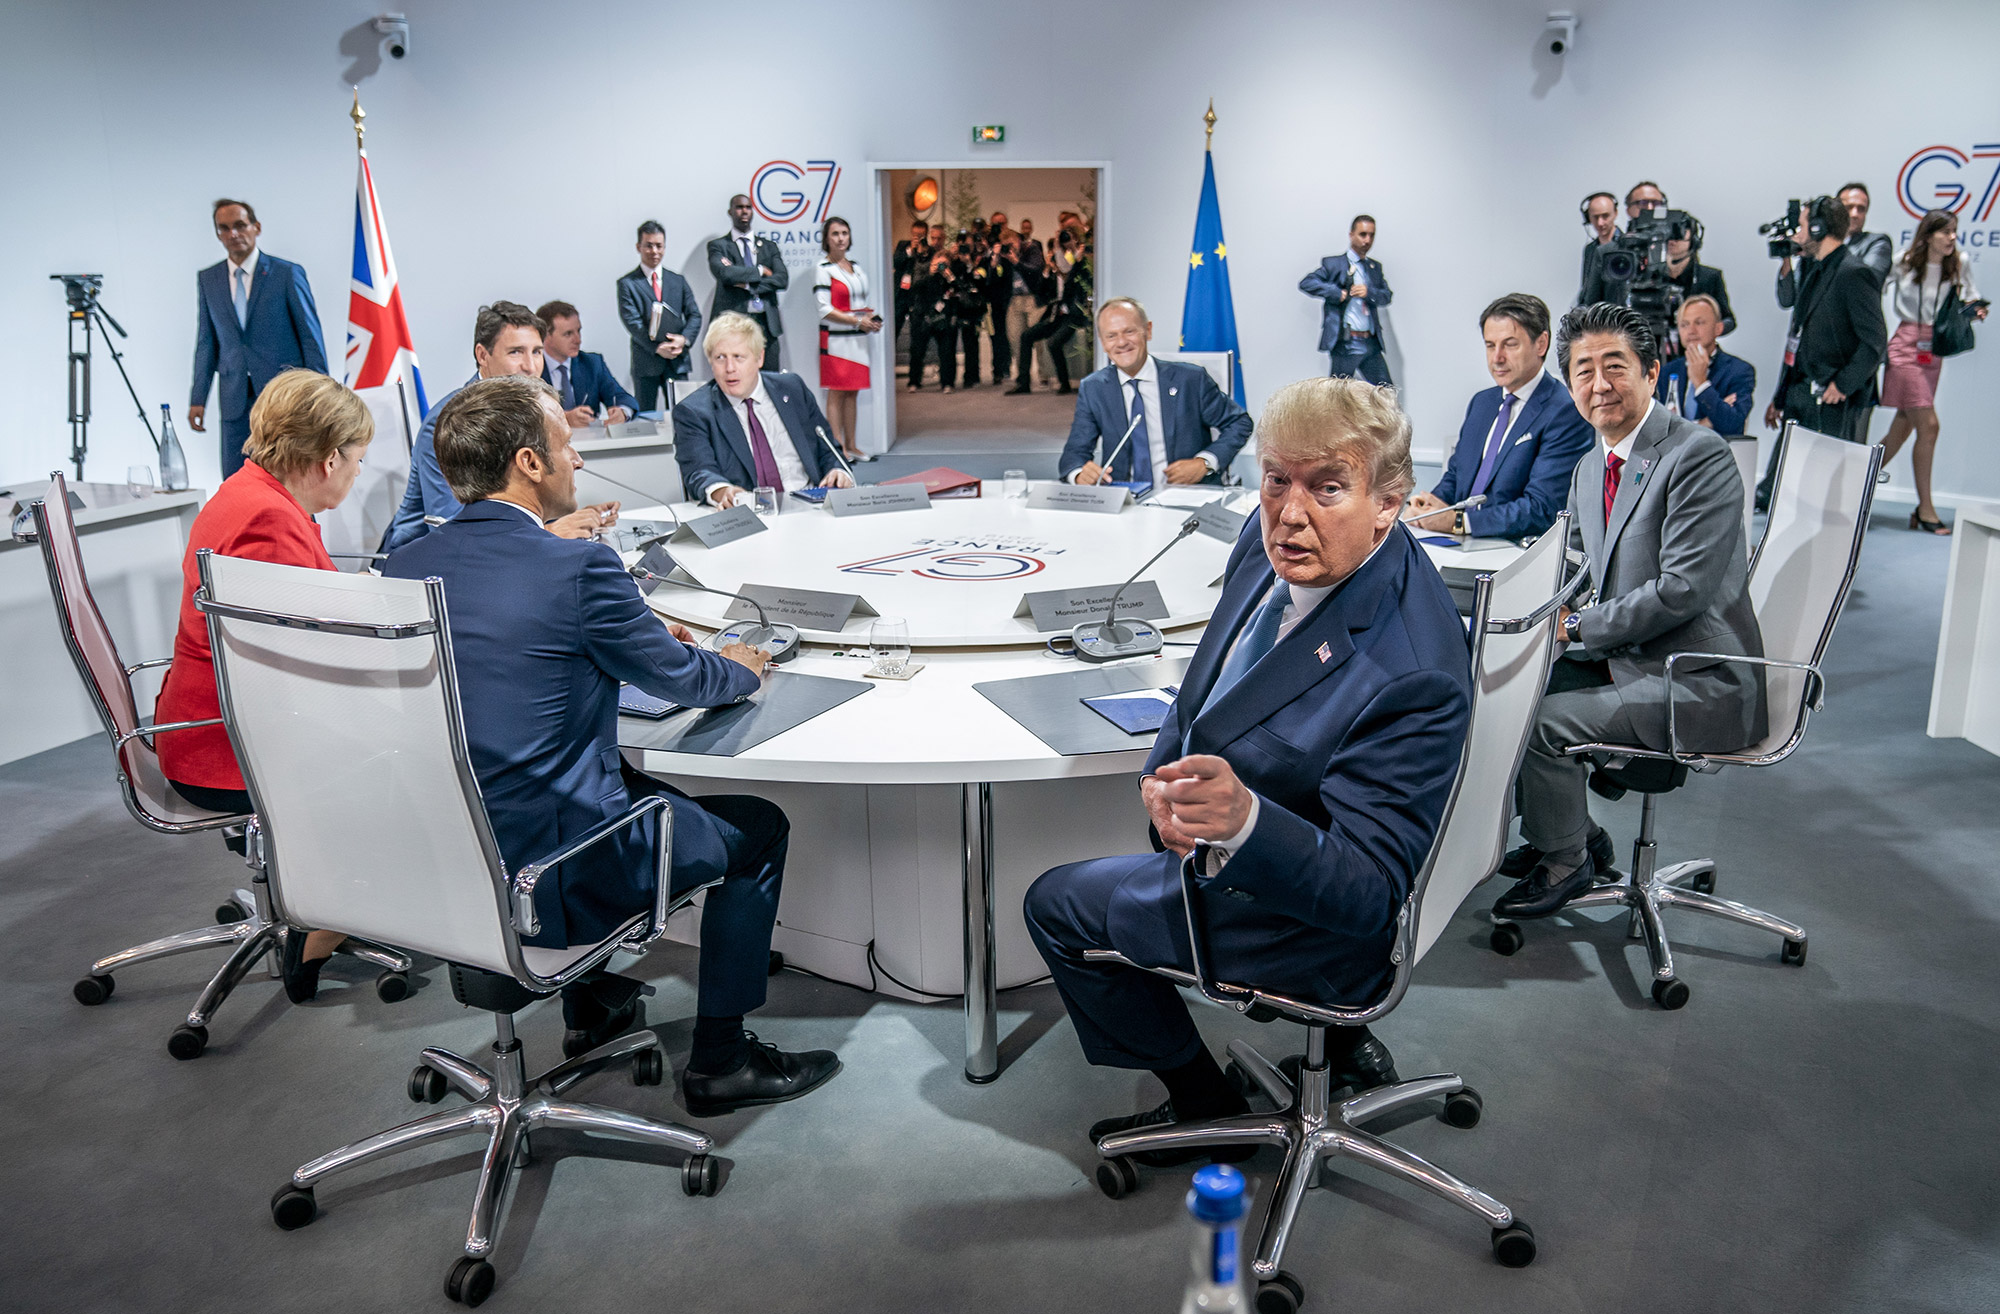 G-7 leaders at the first working session on Sunday.